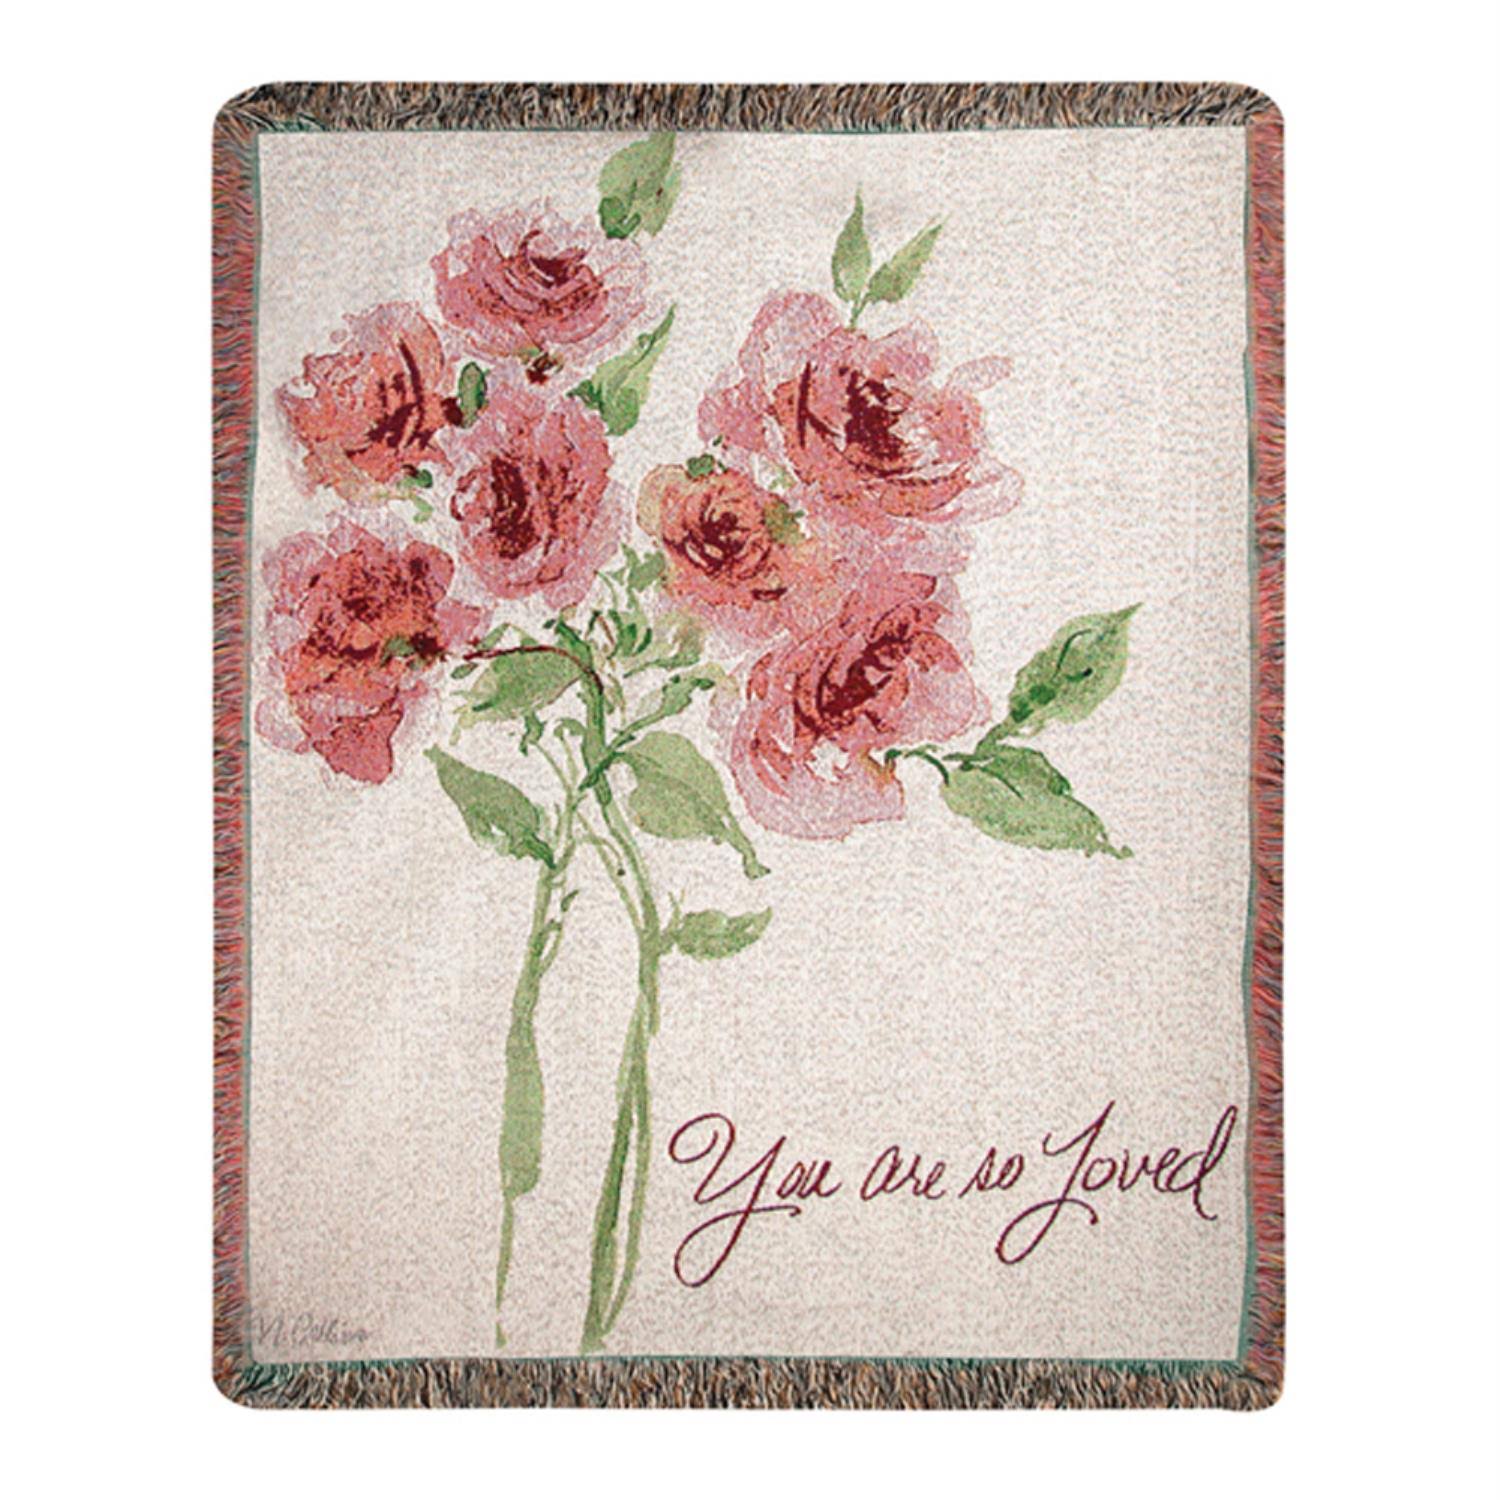 Manual Woodworkers & Weavers Tapestry Throw You Are So Loved 50 x 60